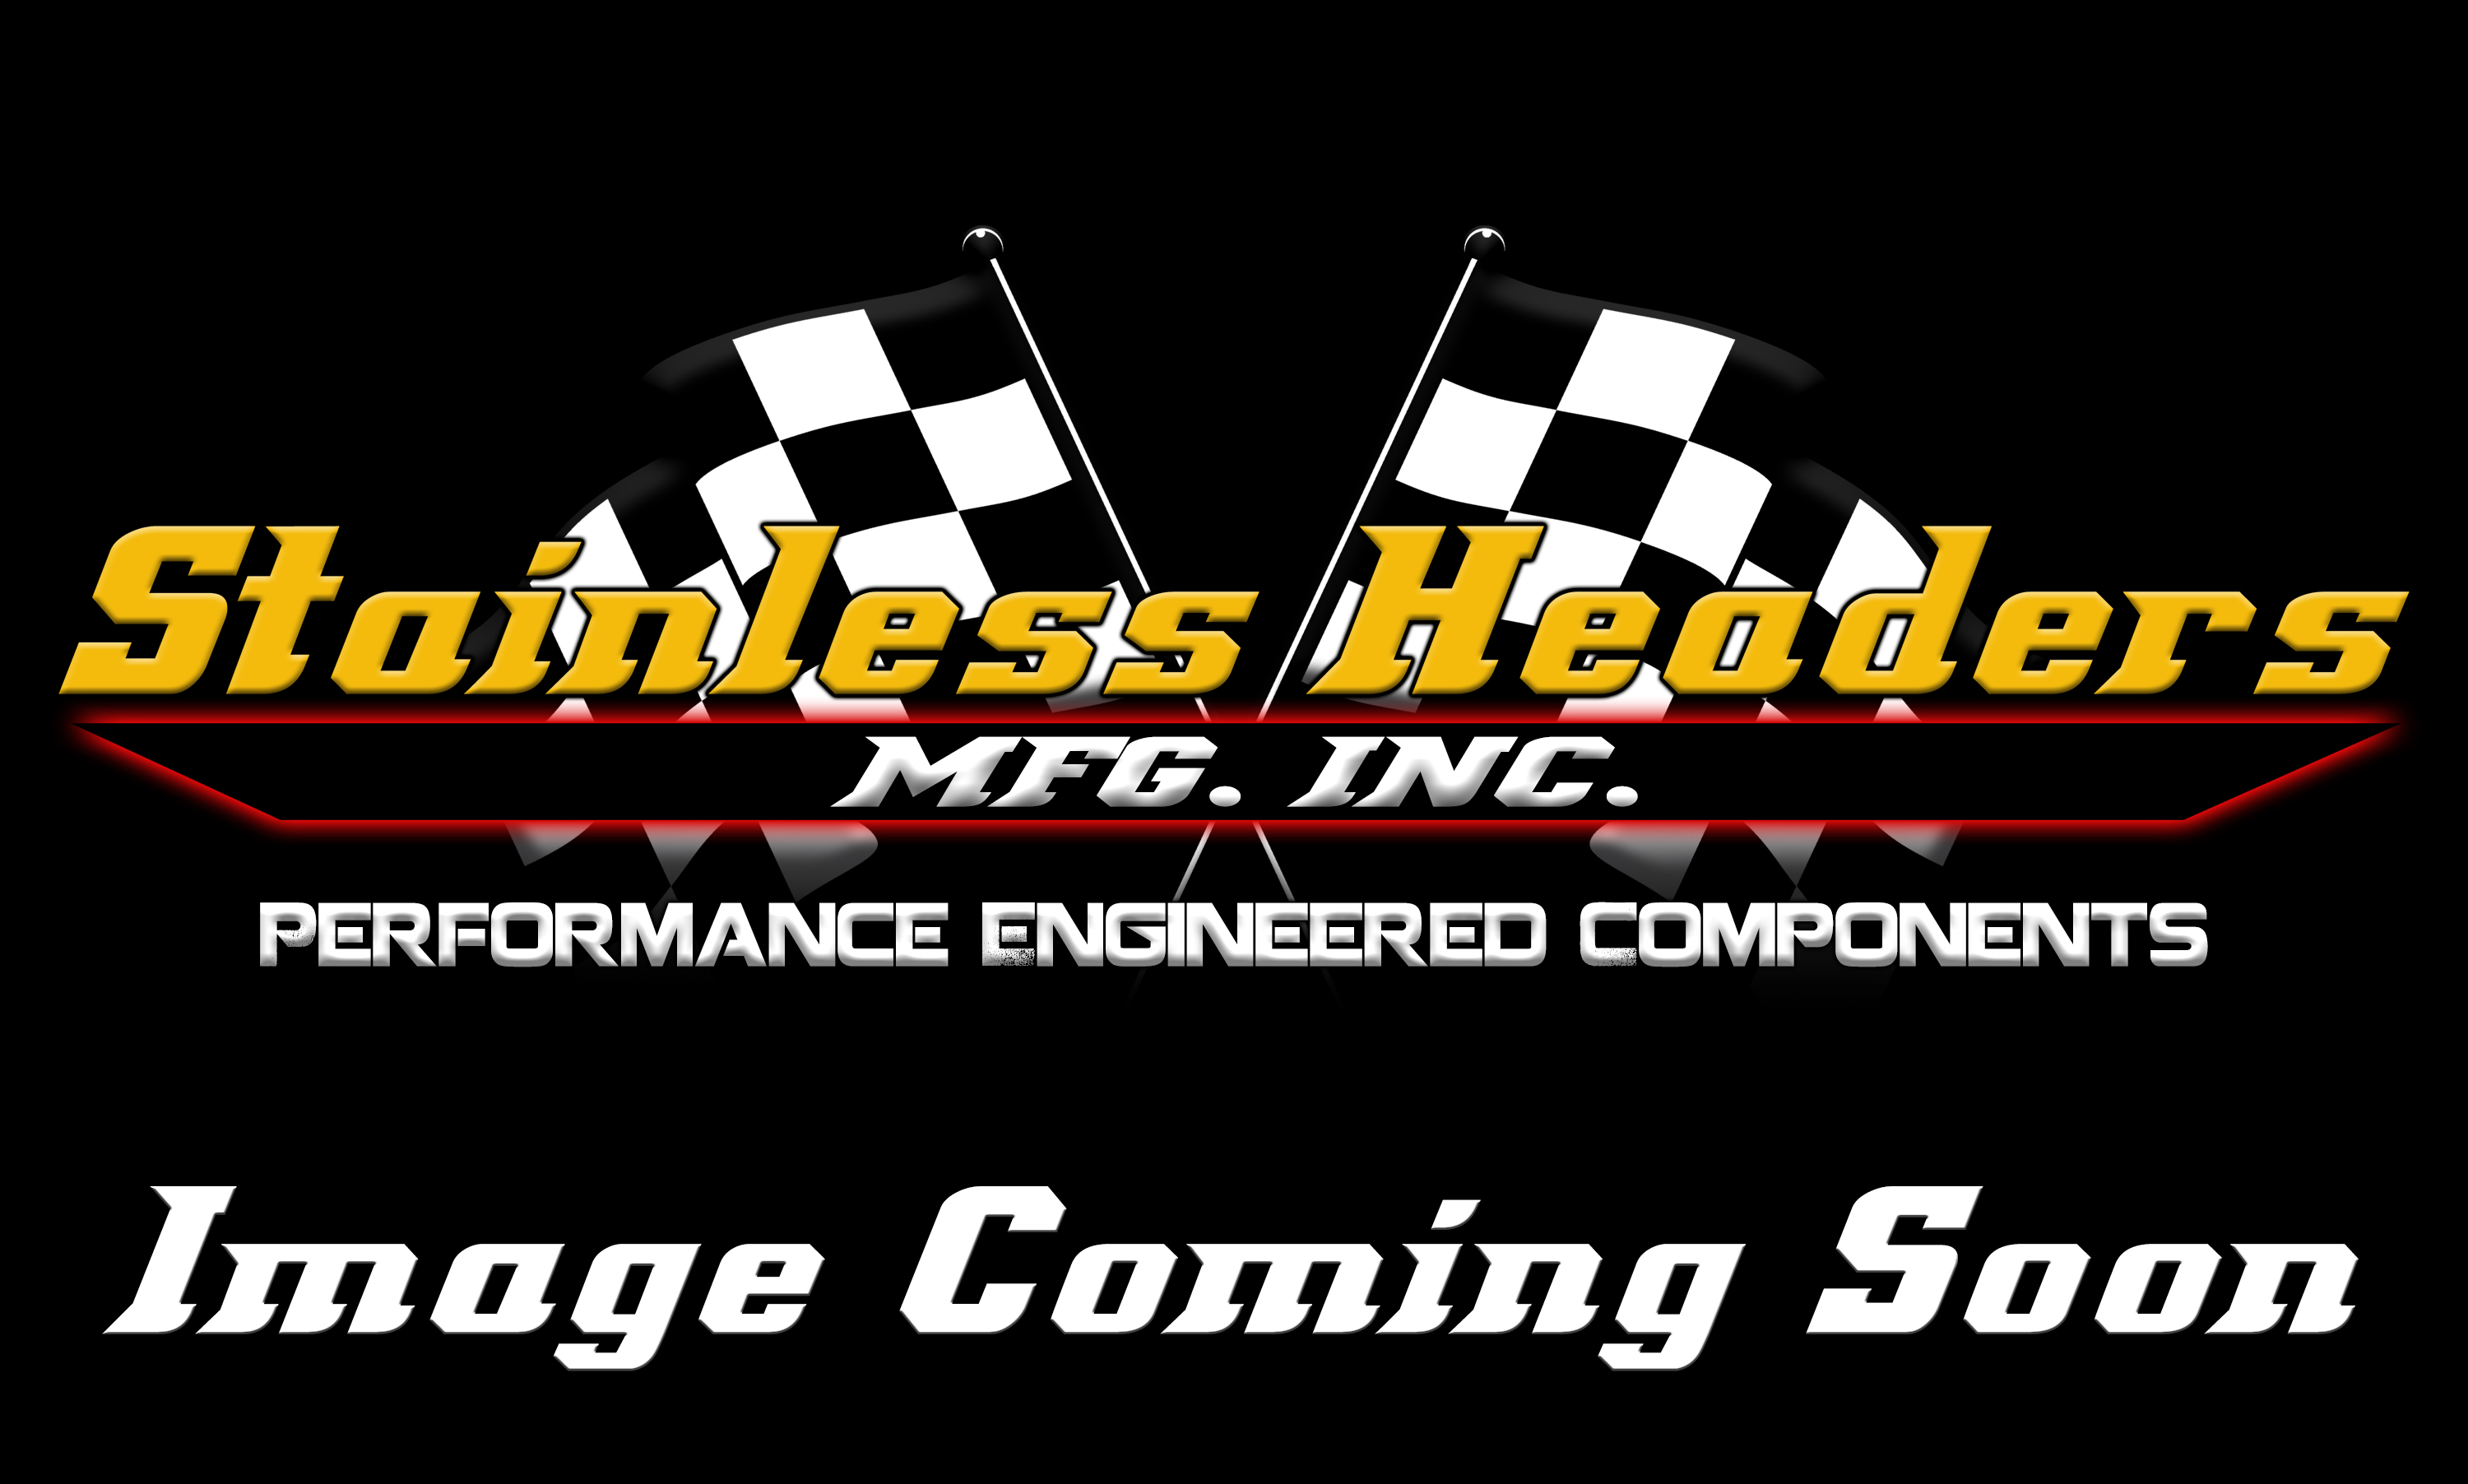 Stainless Headers - 2 1/2" Primary 4 into 1 Performance Merge Collector-16ga 321ss - Image 3